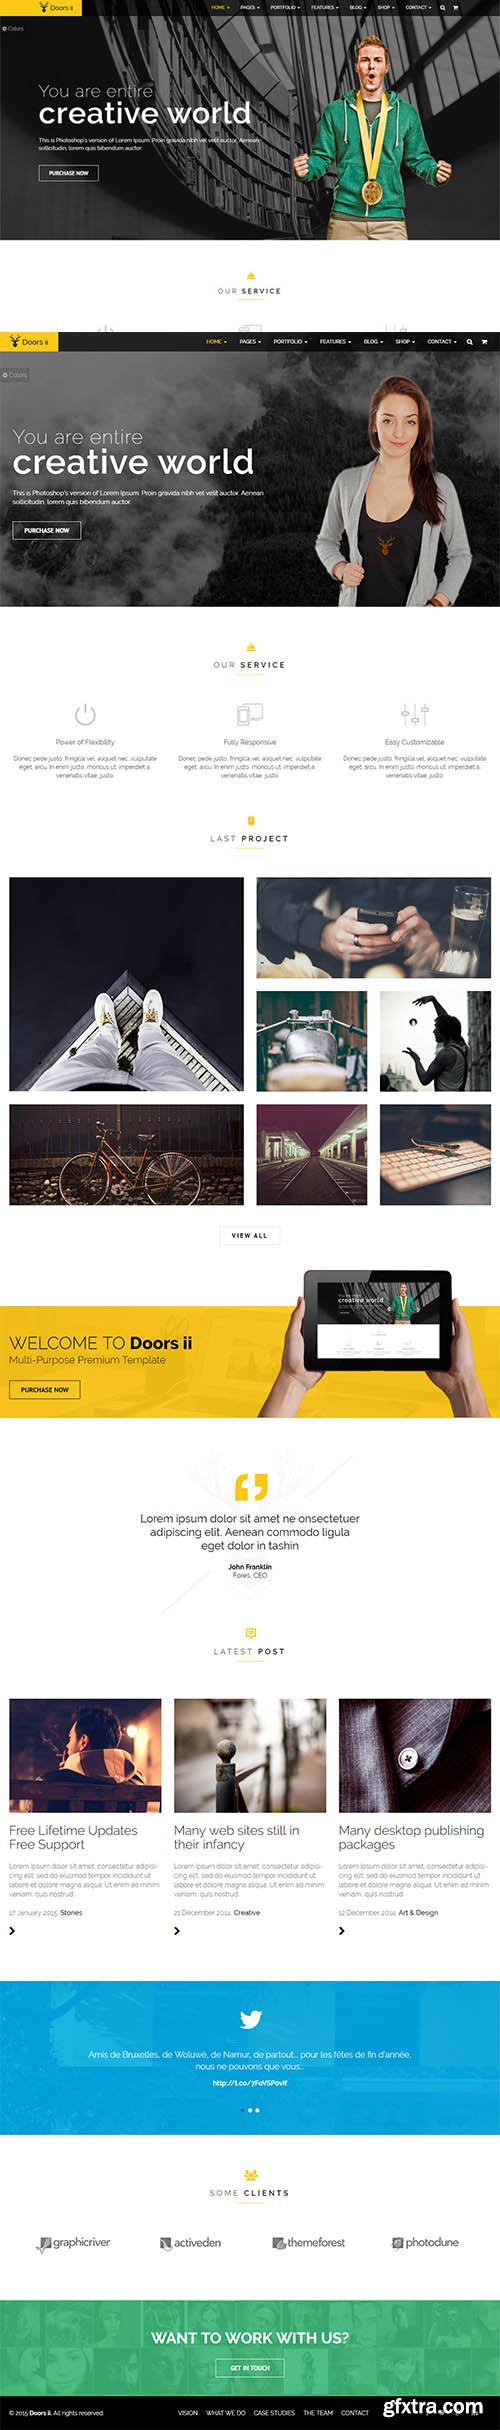 Doors Two - Bootstrap HTMl Template - CM 659277